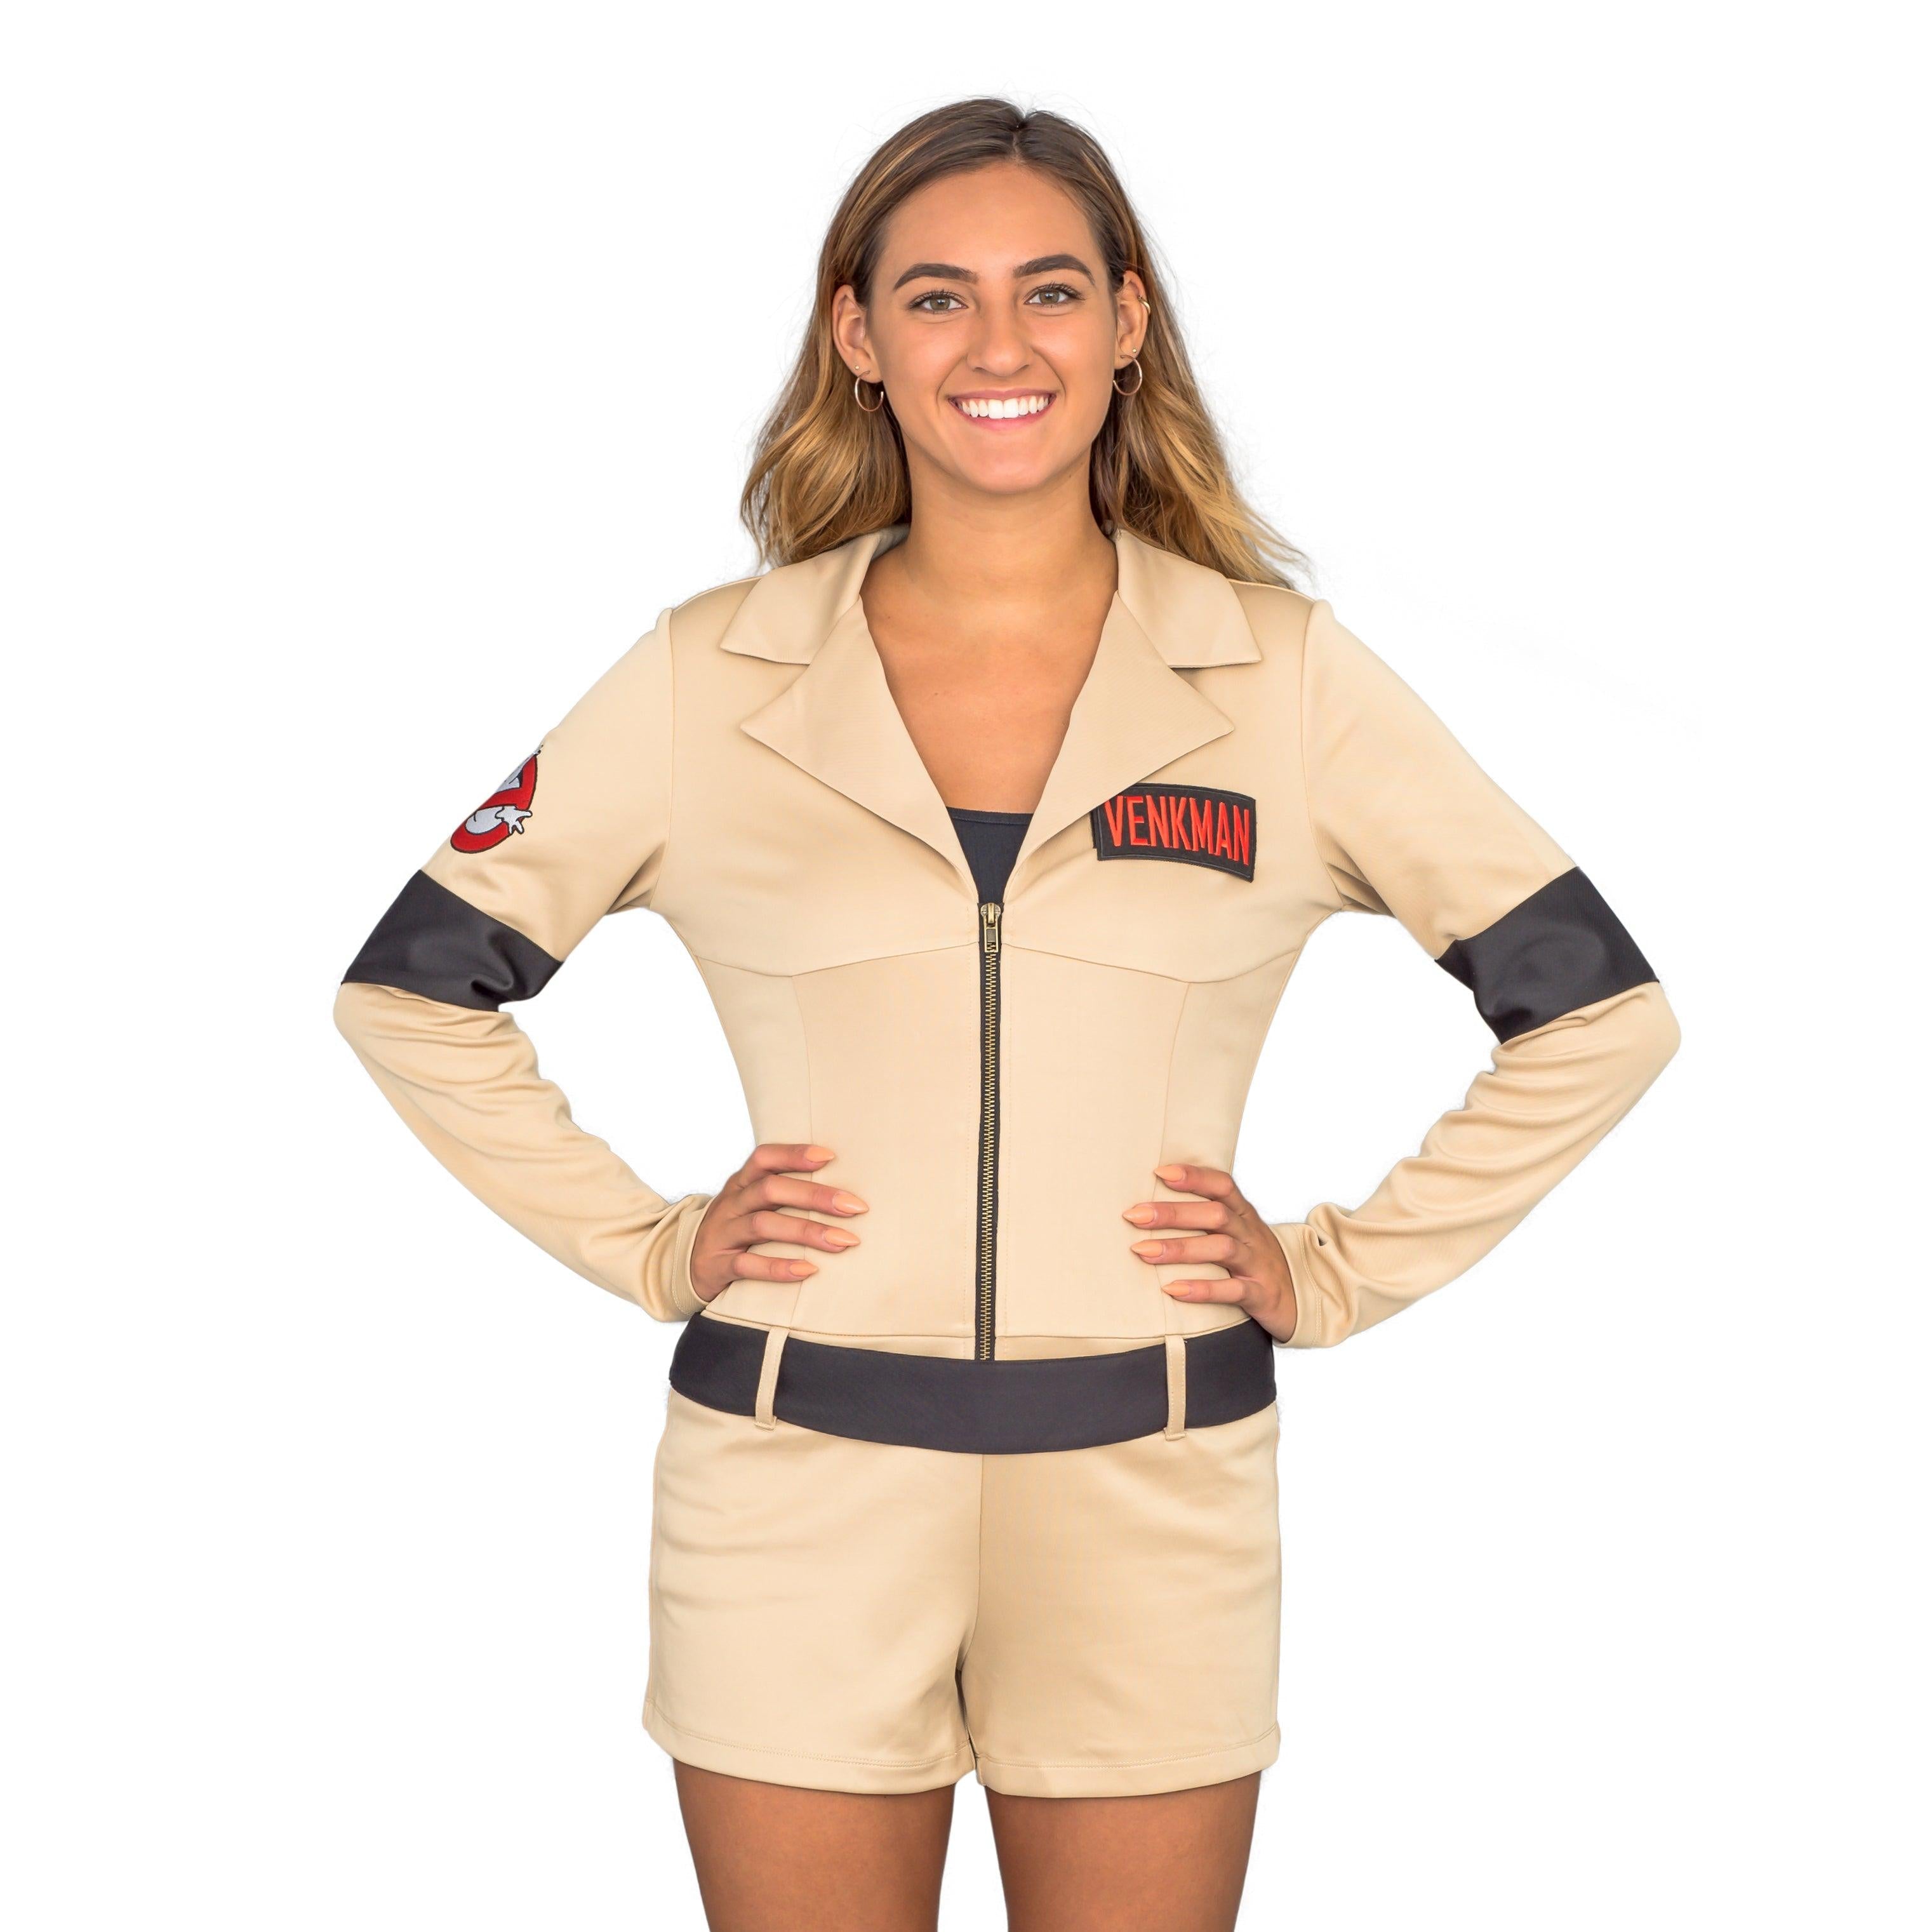 Ghostbusters Ladies Costume Jumpsuit Adults Ghostbuster Fancy Dress Outfit